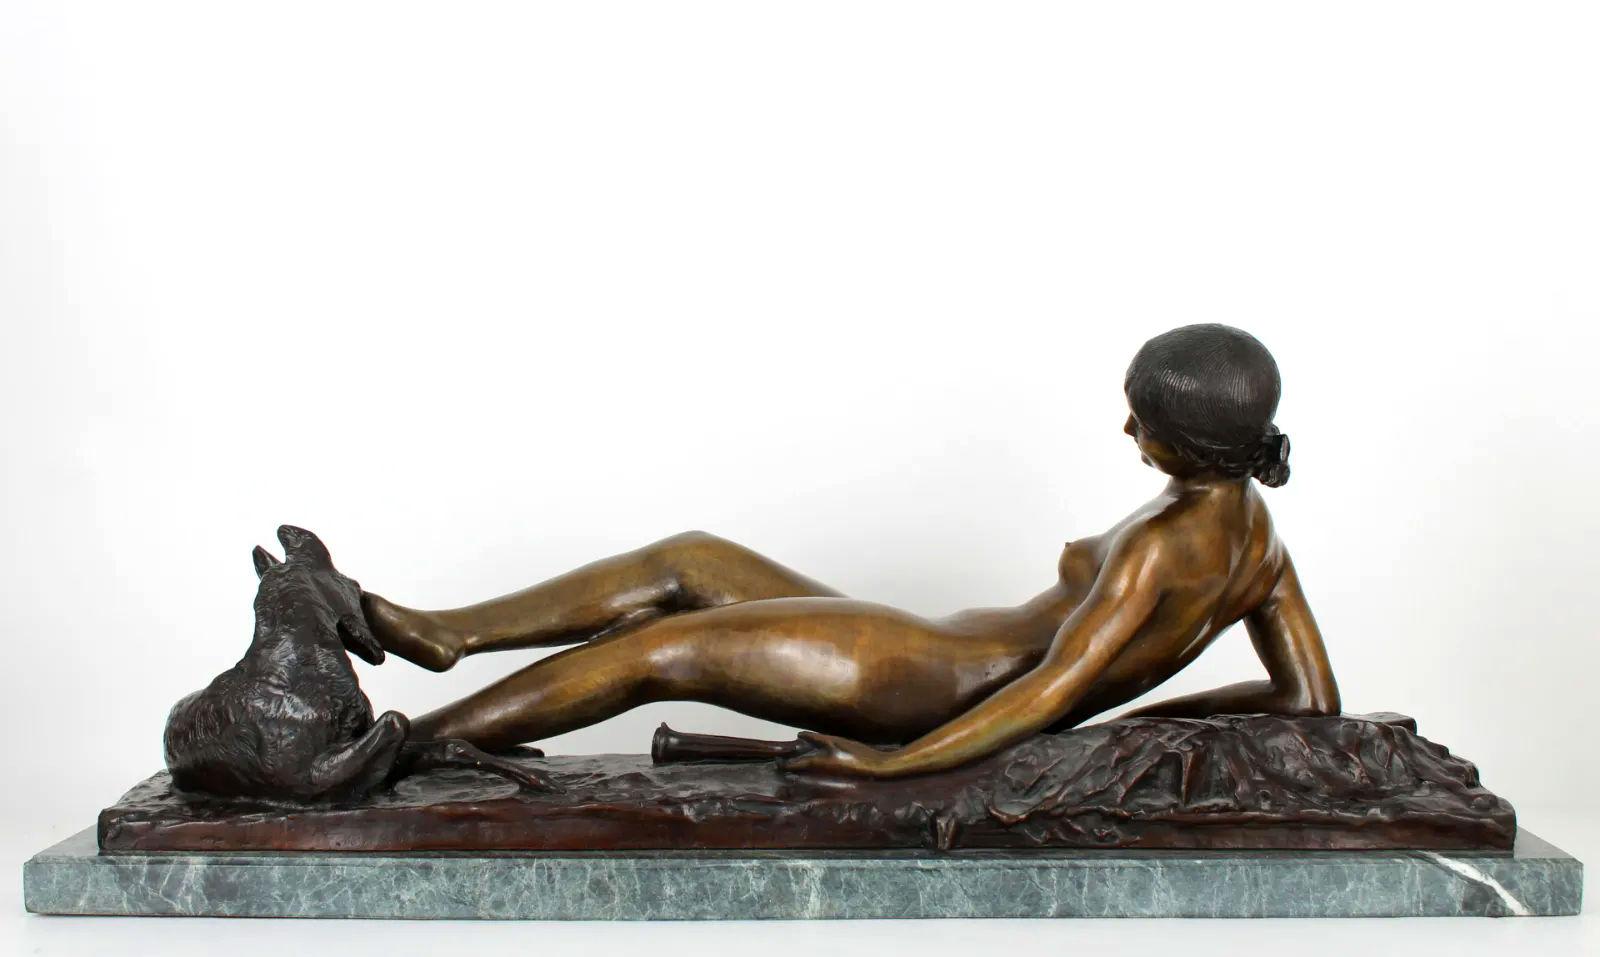 Reclining female nude bronze with baby deer at her feet, mounted on variegated green marble base by Ary Bitter (1883-1973).